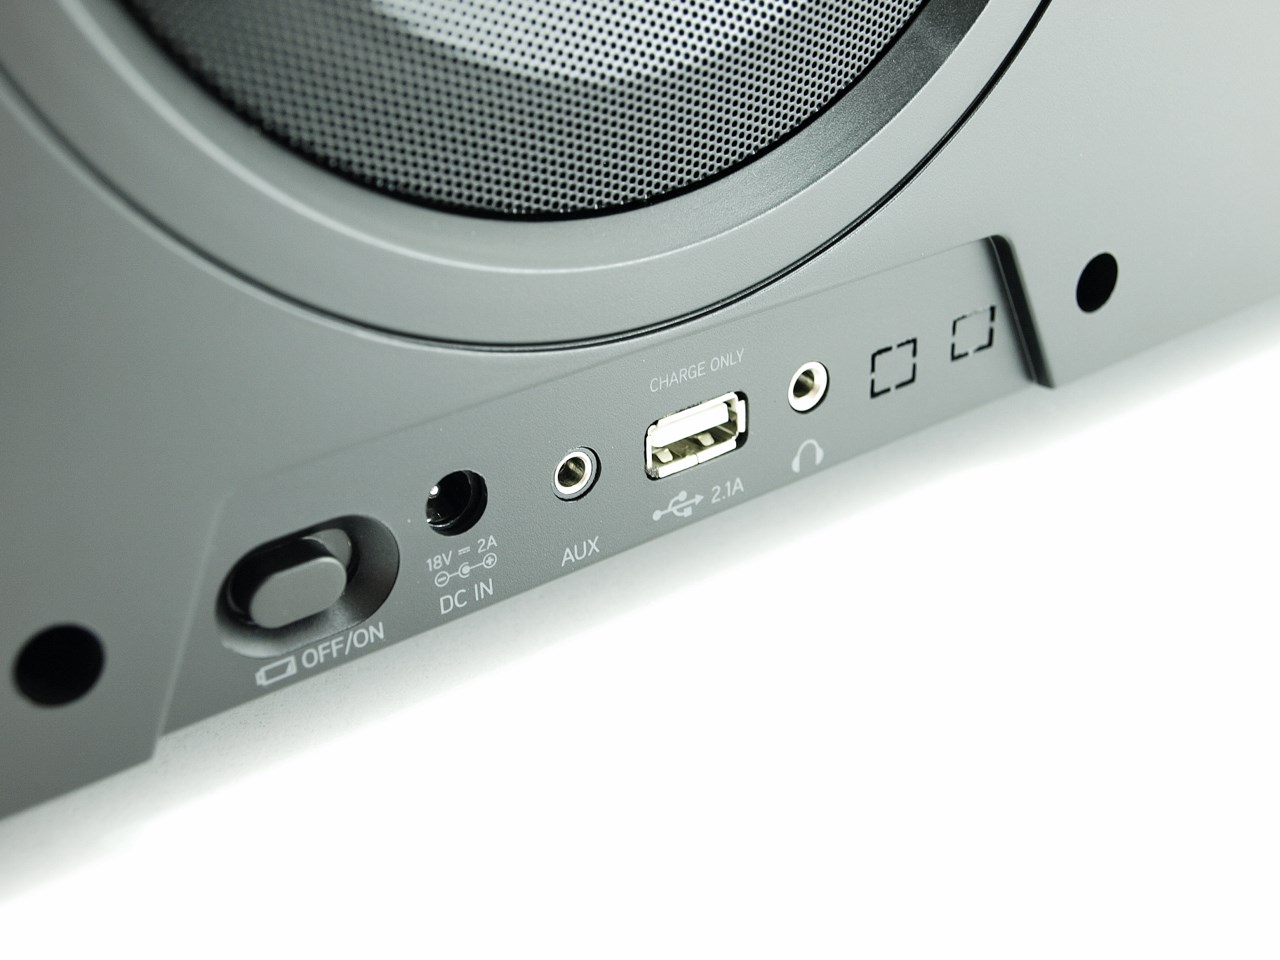 TDK A73 Wireless Boombox Review